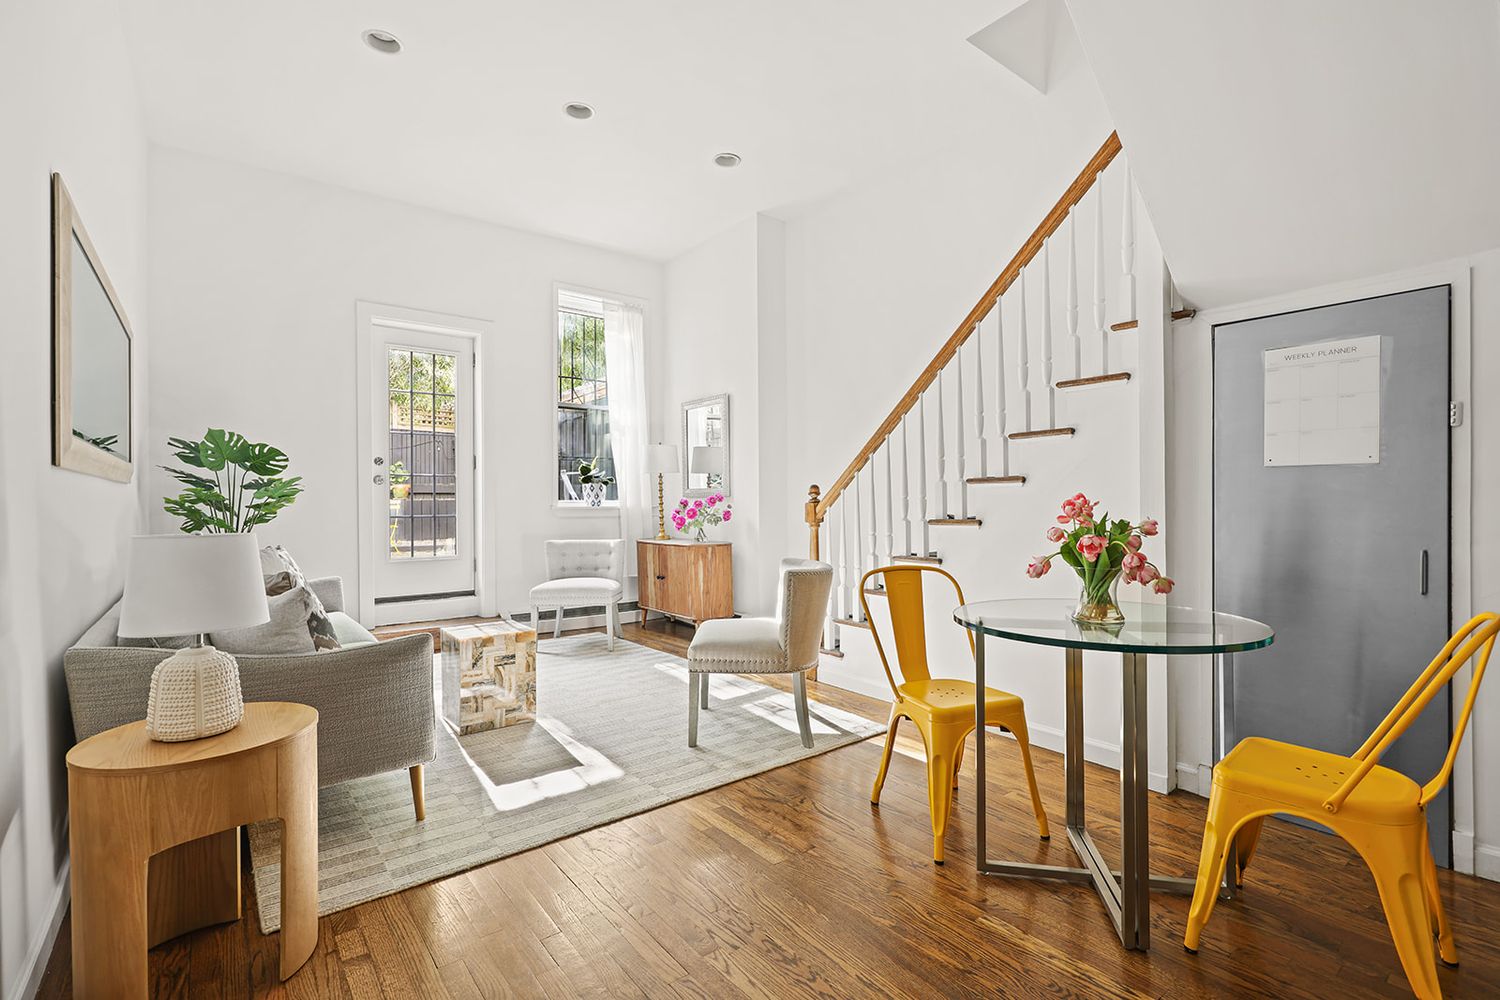 Park Slope, Brooklyn, NY Real Estate & Homes for Sale